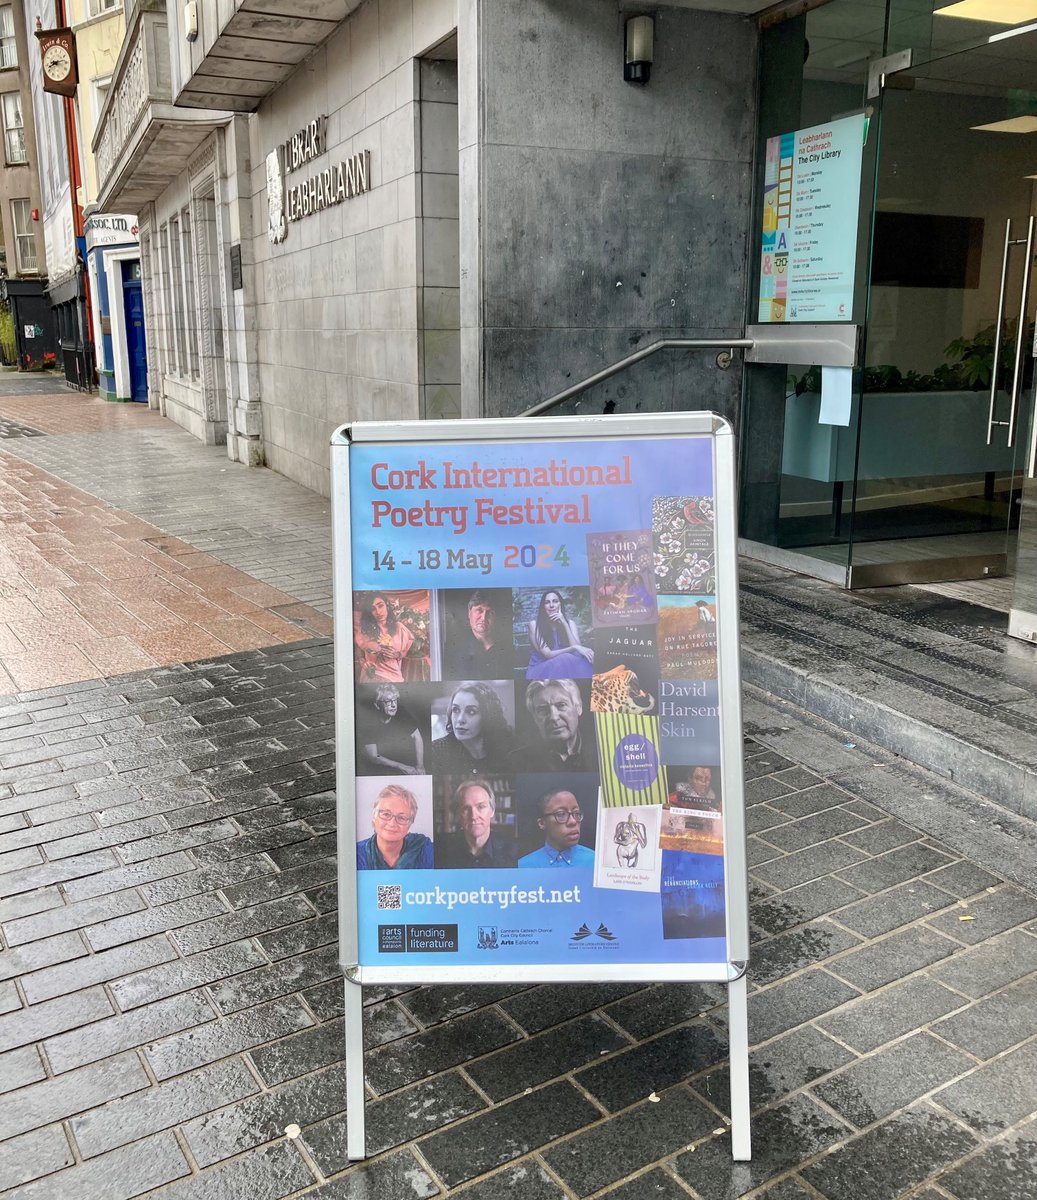 The Cork International Poetry Festival is in full swing at the City Library! 📖✨ Grab a programme and join us for a celebration of poetry with readings, discussions, and workshops from 14 - 18 May. #CorkCityLibraries #CorkPoetryFest